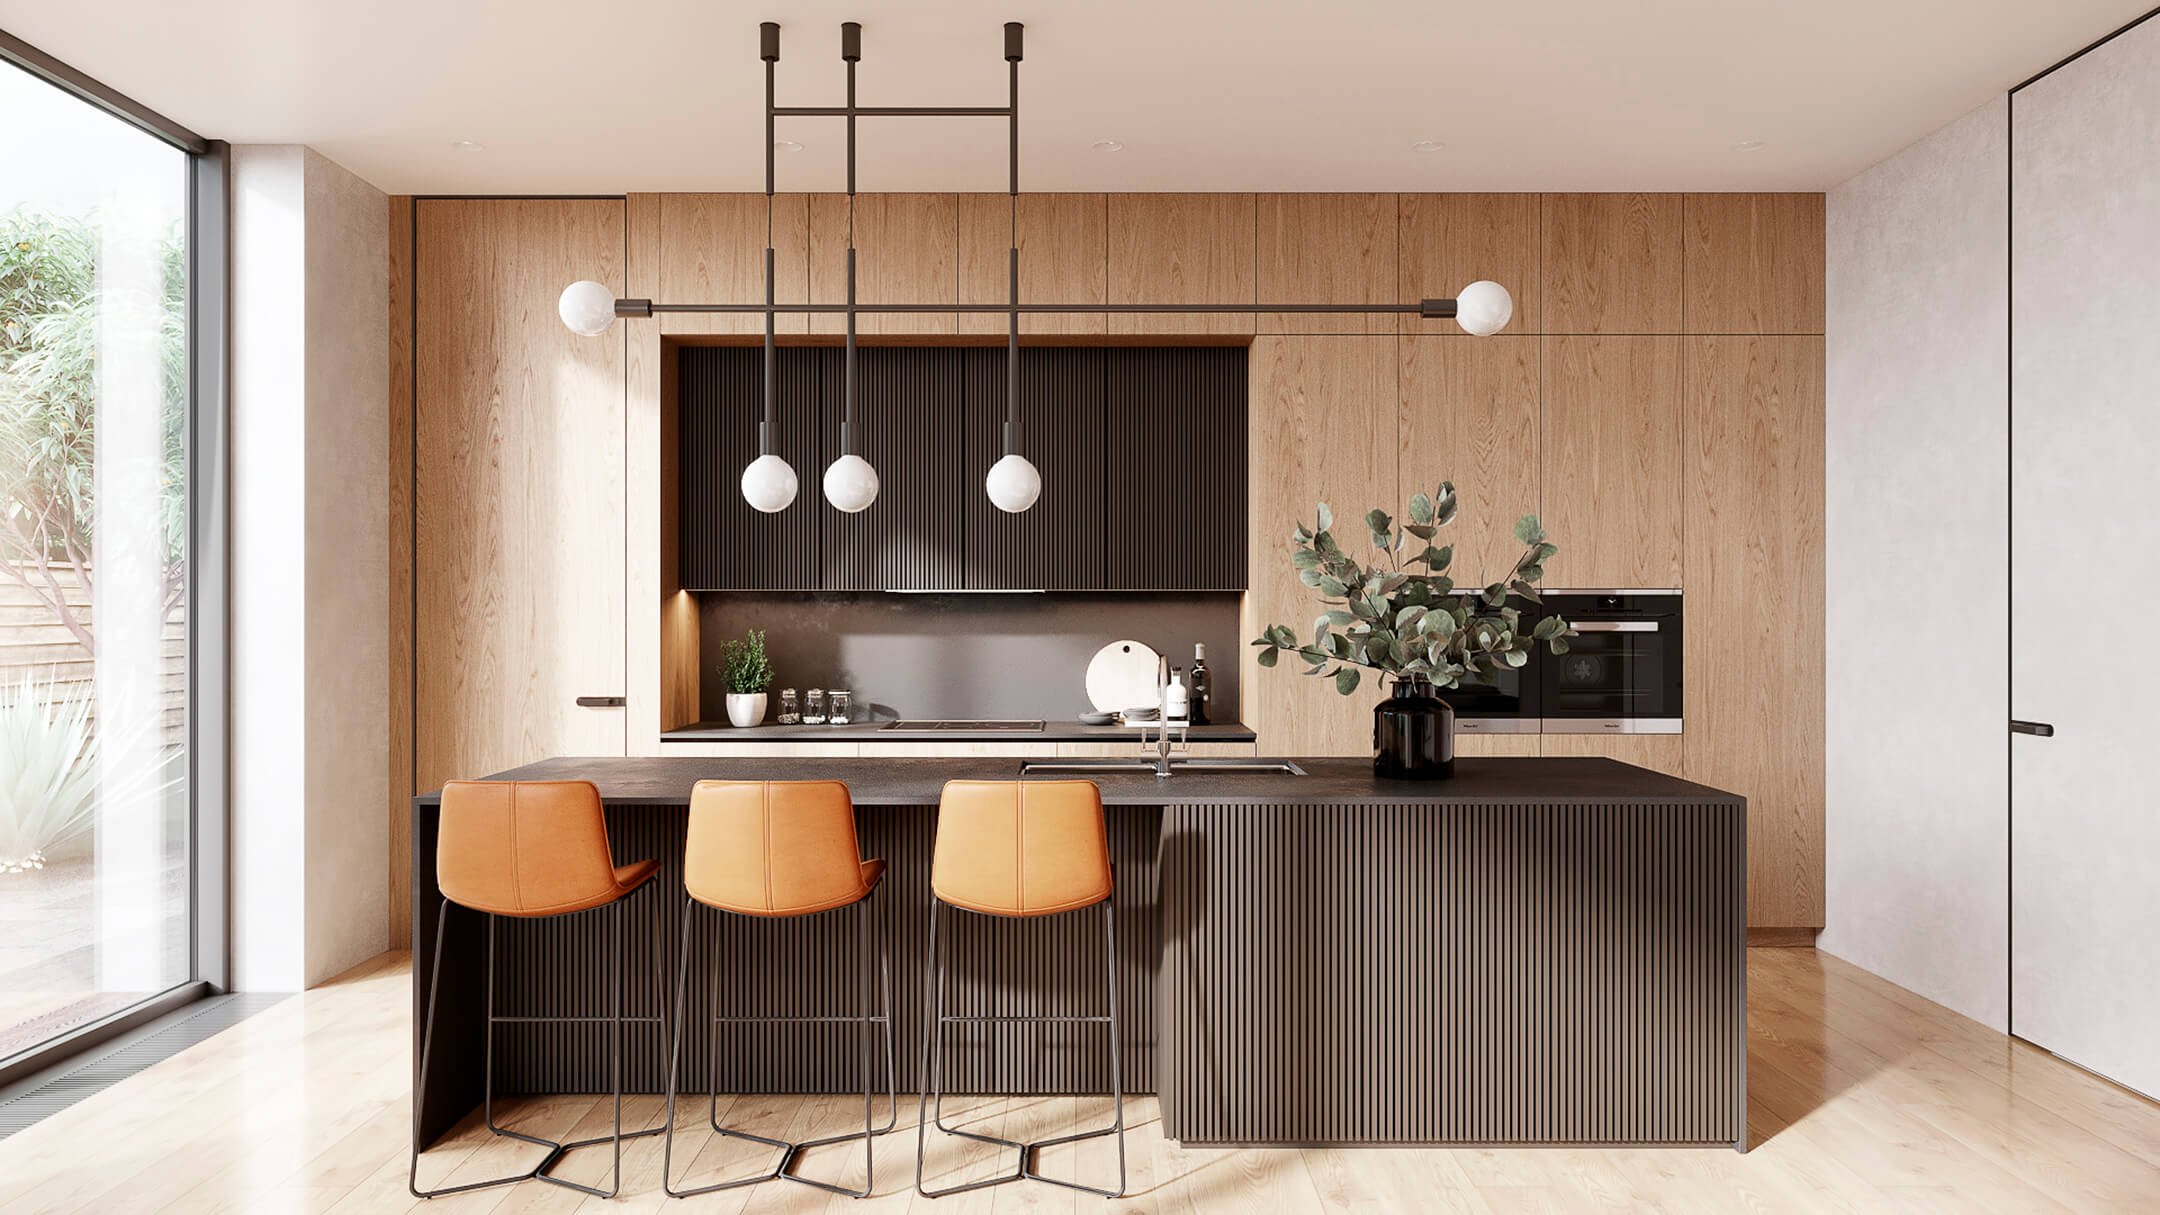 A Photorealistic Render of a Kitchen